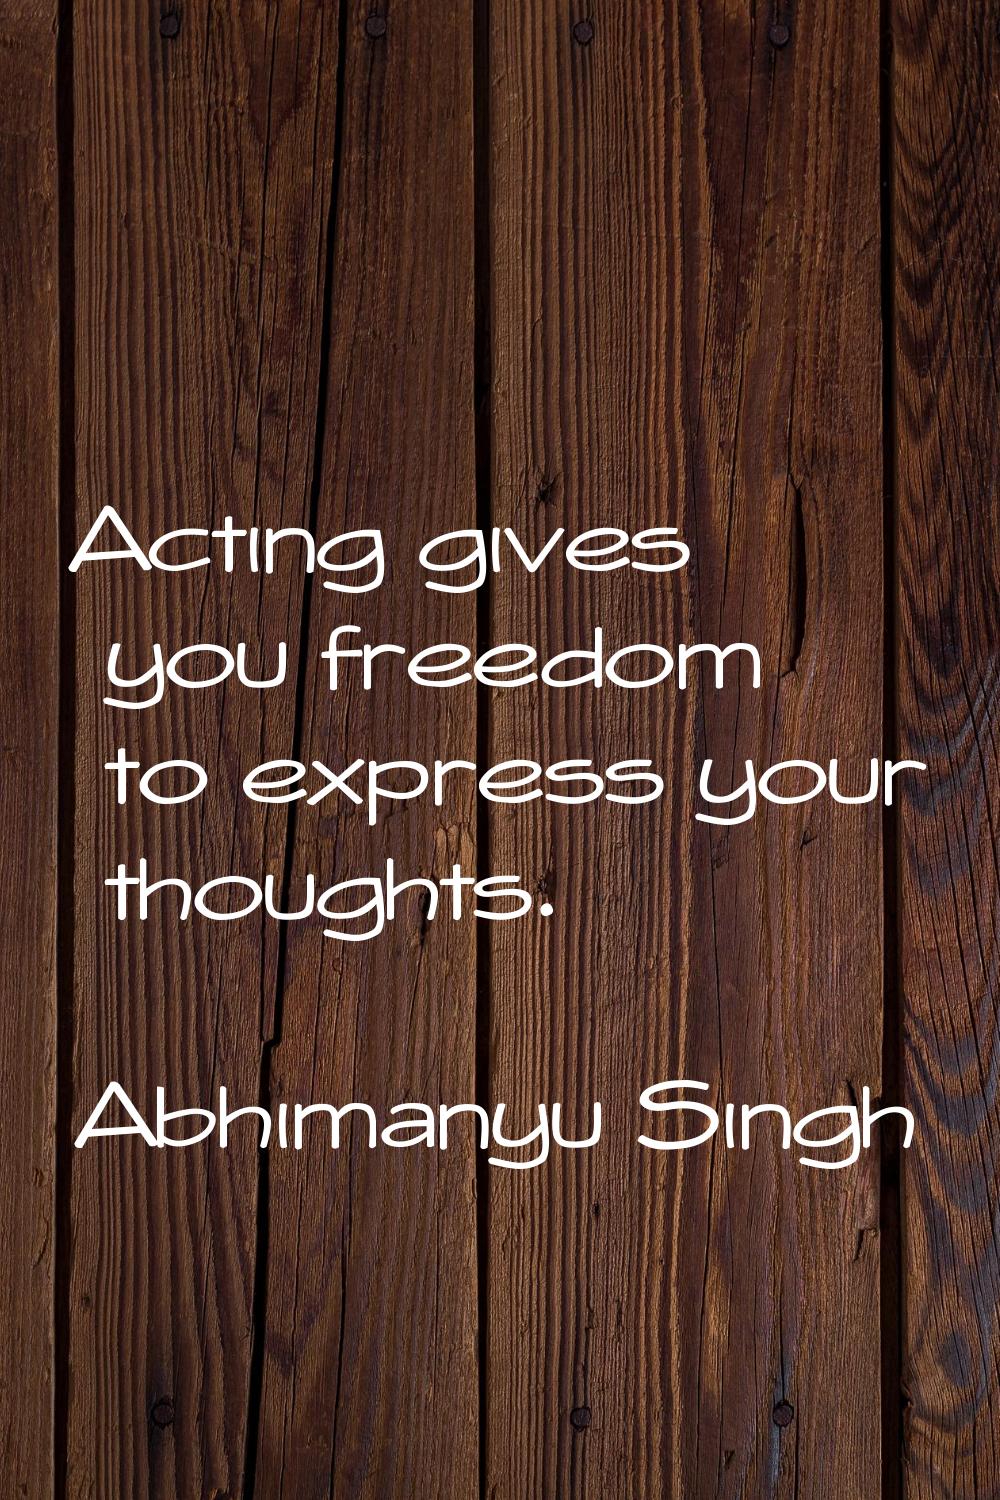 Acting gives you freedom to express your thoughts.